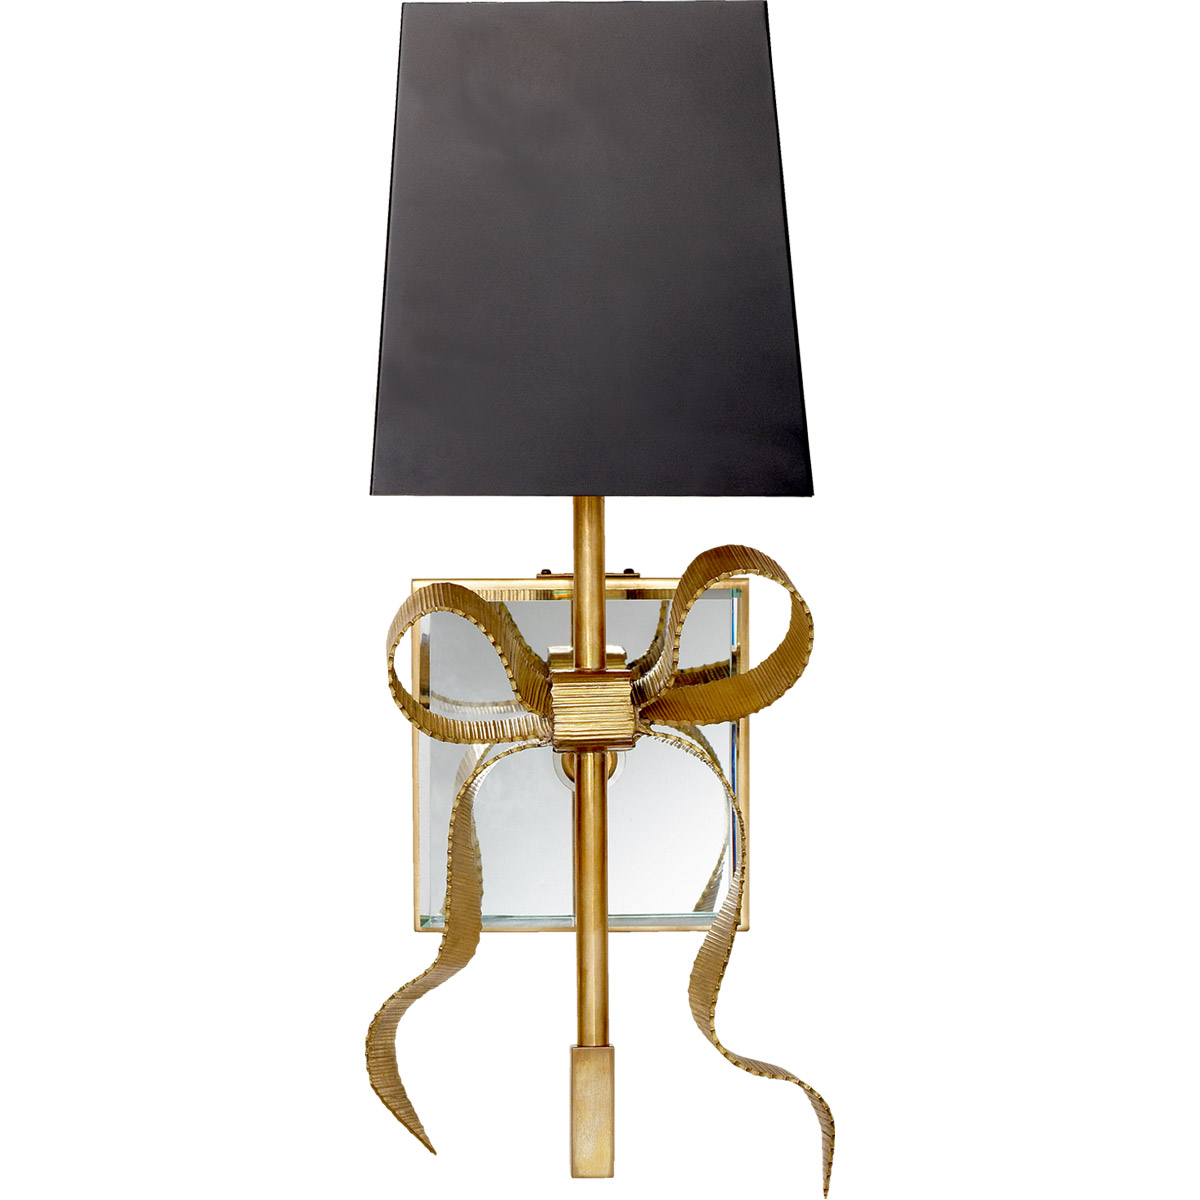 Visual Comfort Signature Collection | Visual Comfort KS2008SB-B kate spade  new york Ellery 1 Light 5 inch Soft Brass Gros-Grain Bow Sconce Wall Light  in Matte Black, Small